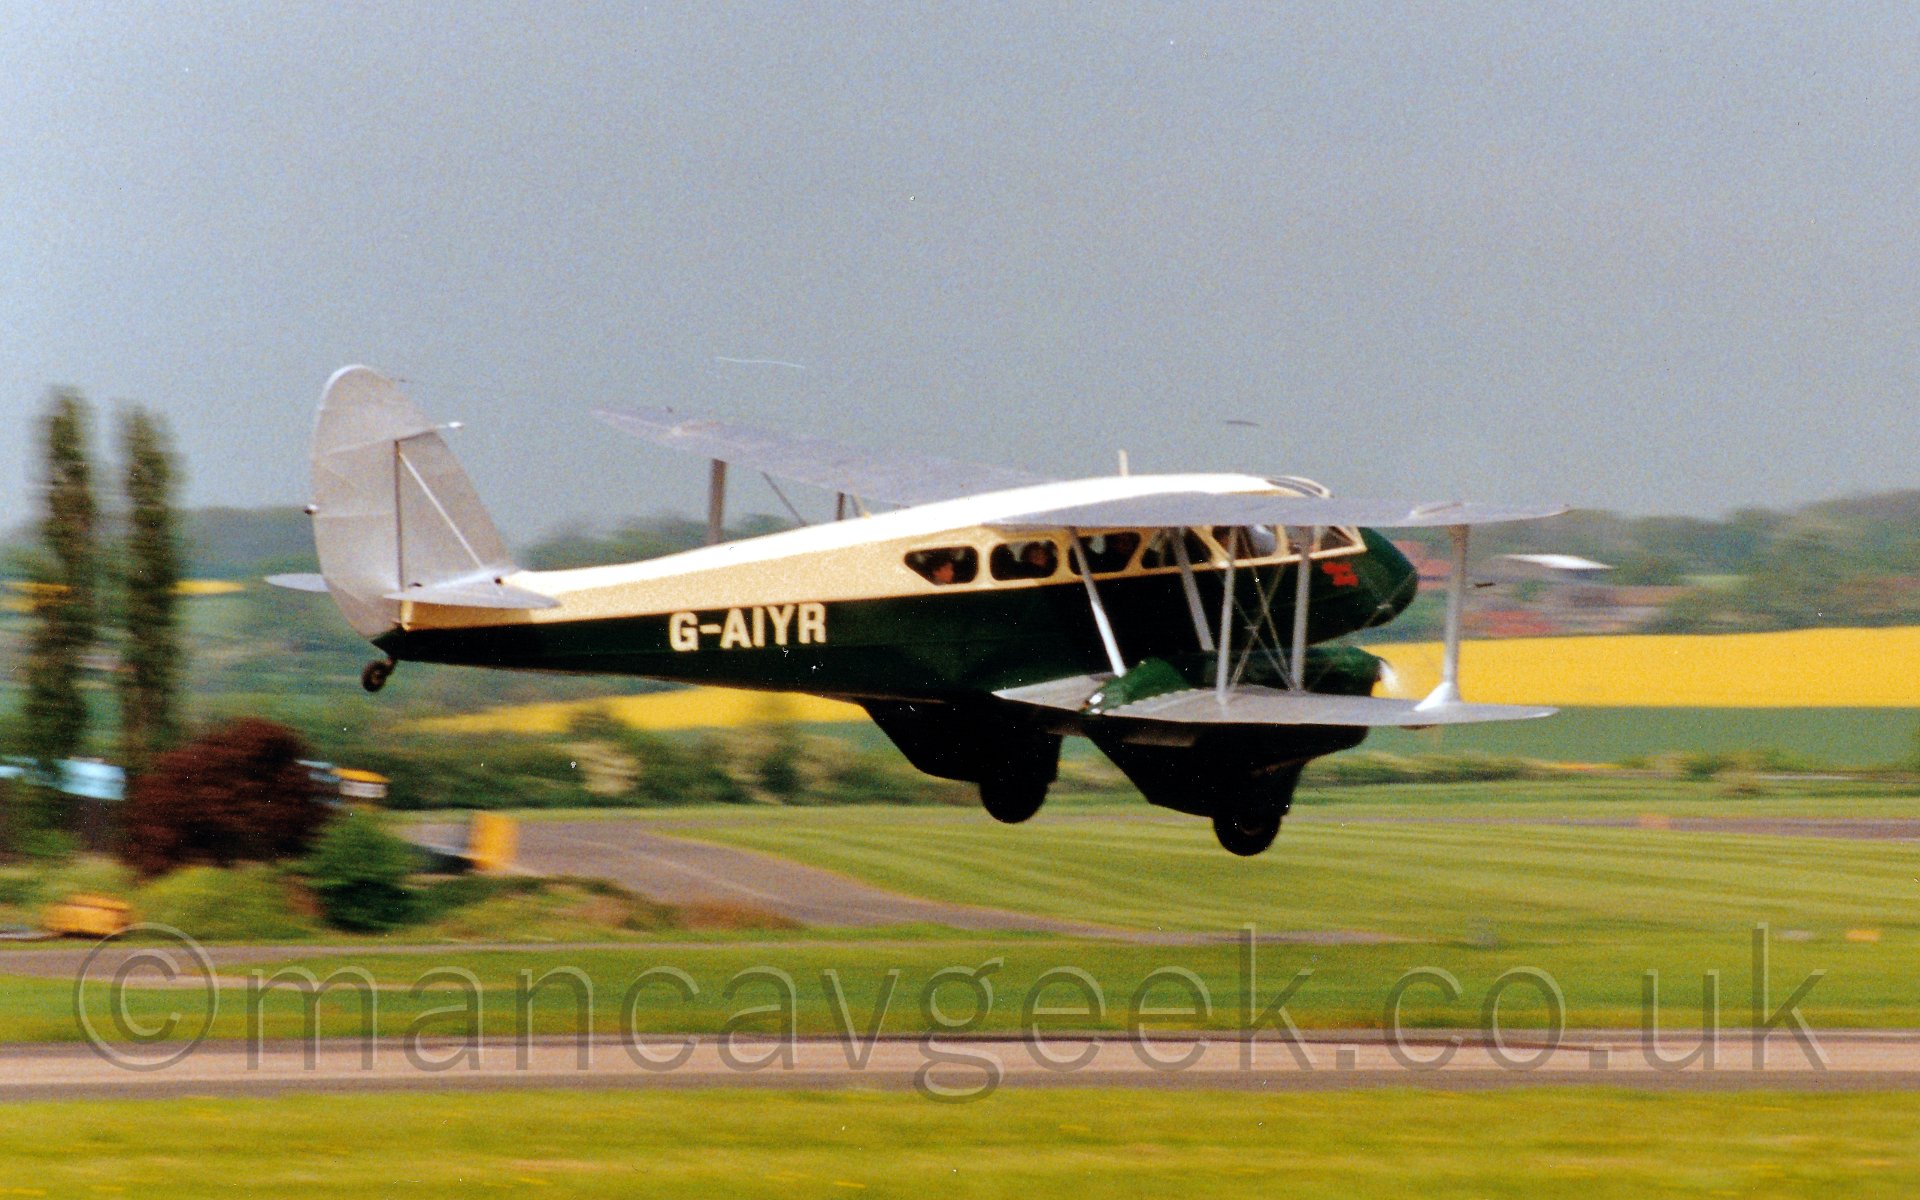 Side view of a twin engined biplane airliner flying at low level from left to right. The plane has a dark green lower half and creamy yellow upper section, with the registration "G-AIYR" also in the same creamy yellow. People are visible through the many large cabin windows.The engines mounted on the lower wings are the same green as the fuselage. In the background, large grassed areas lead off to yellow and green fields, surrounded by large areas of trees., all under a blue-grey sky.